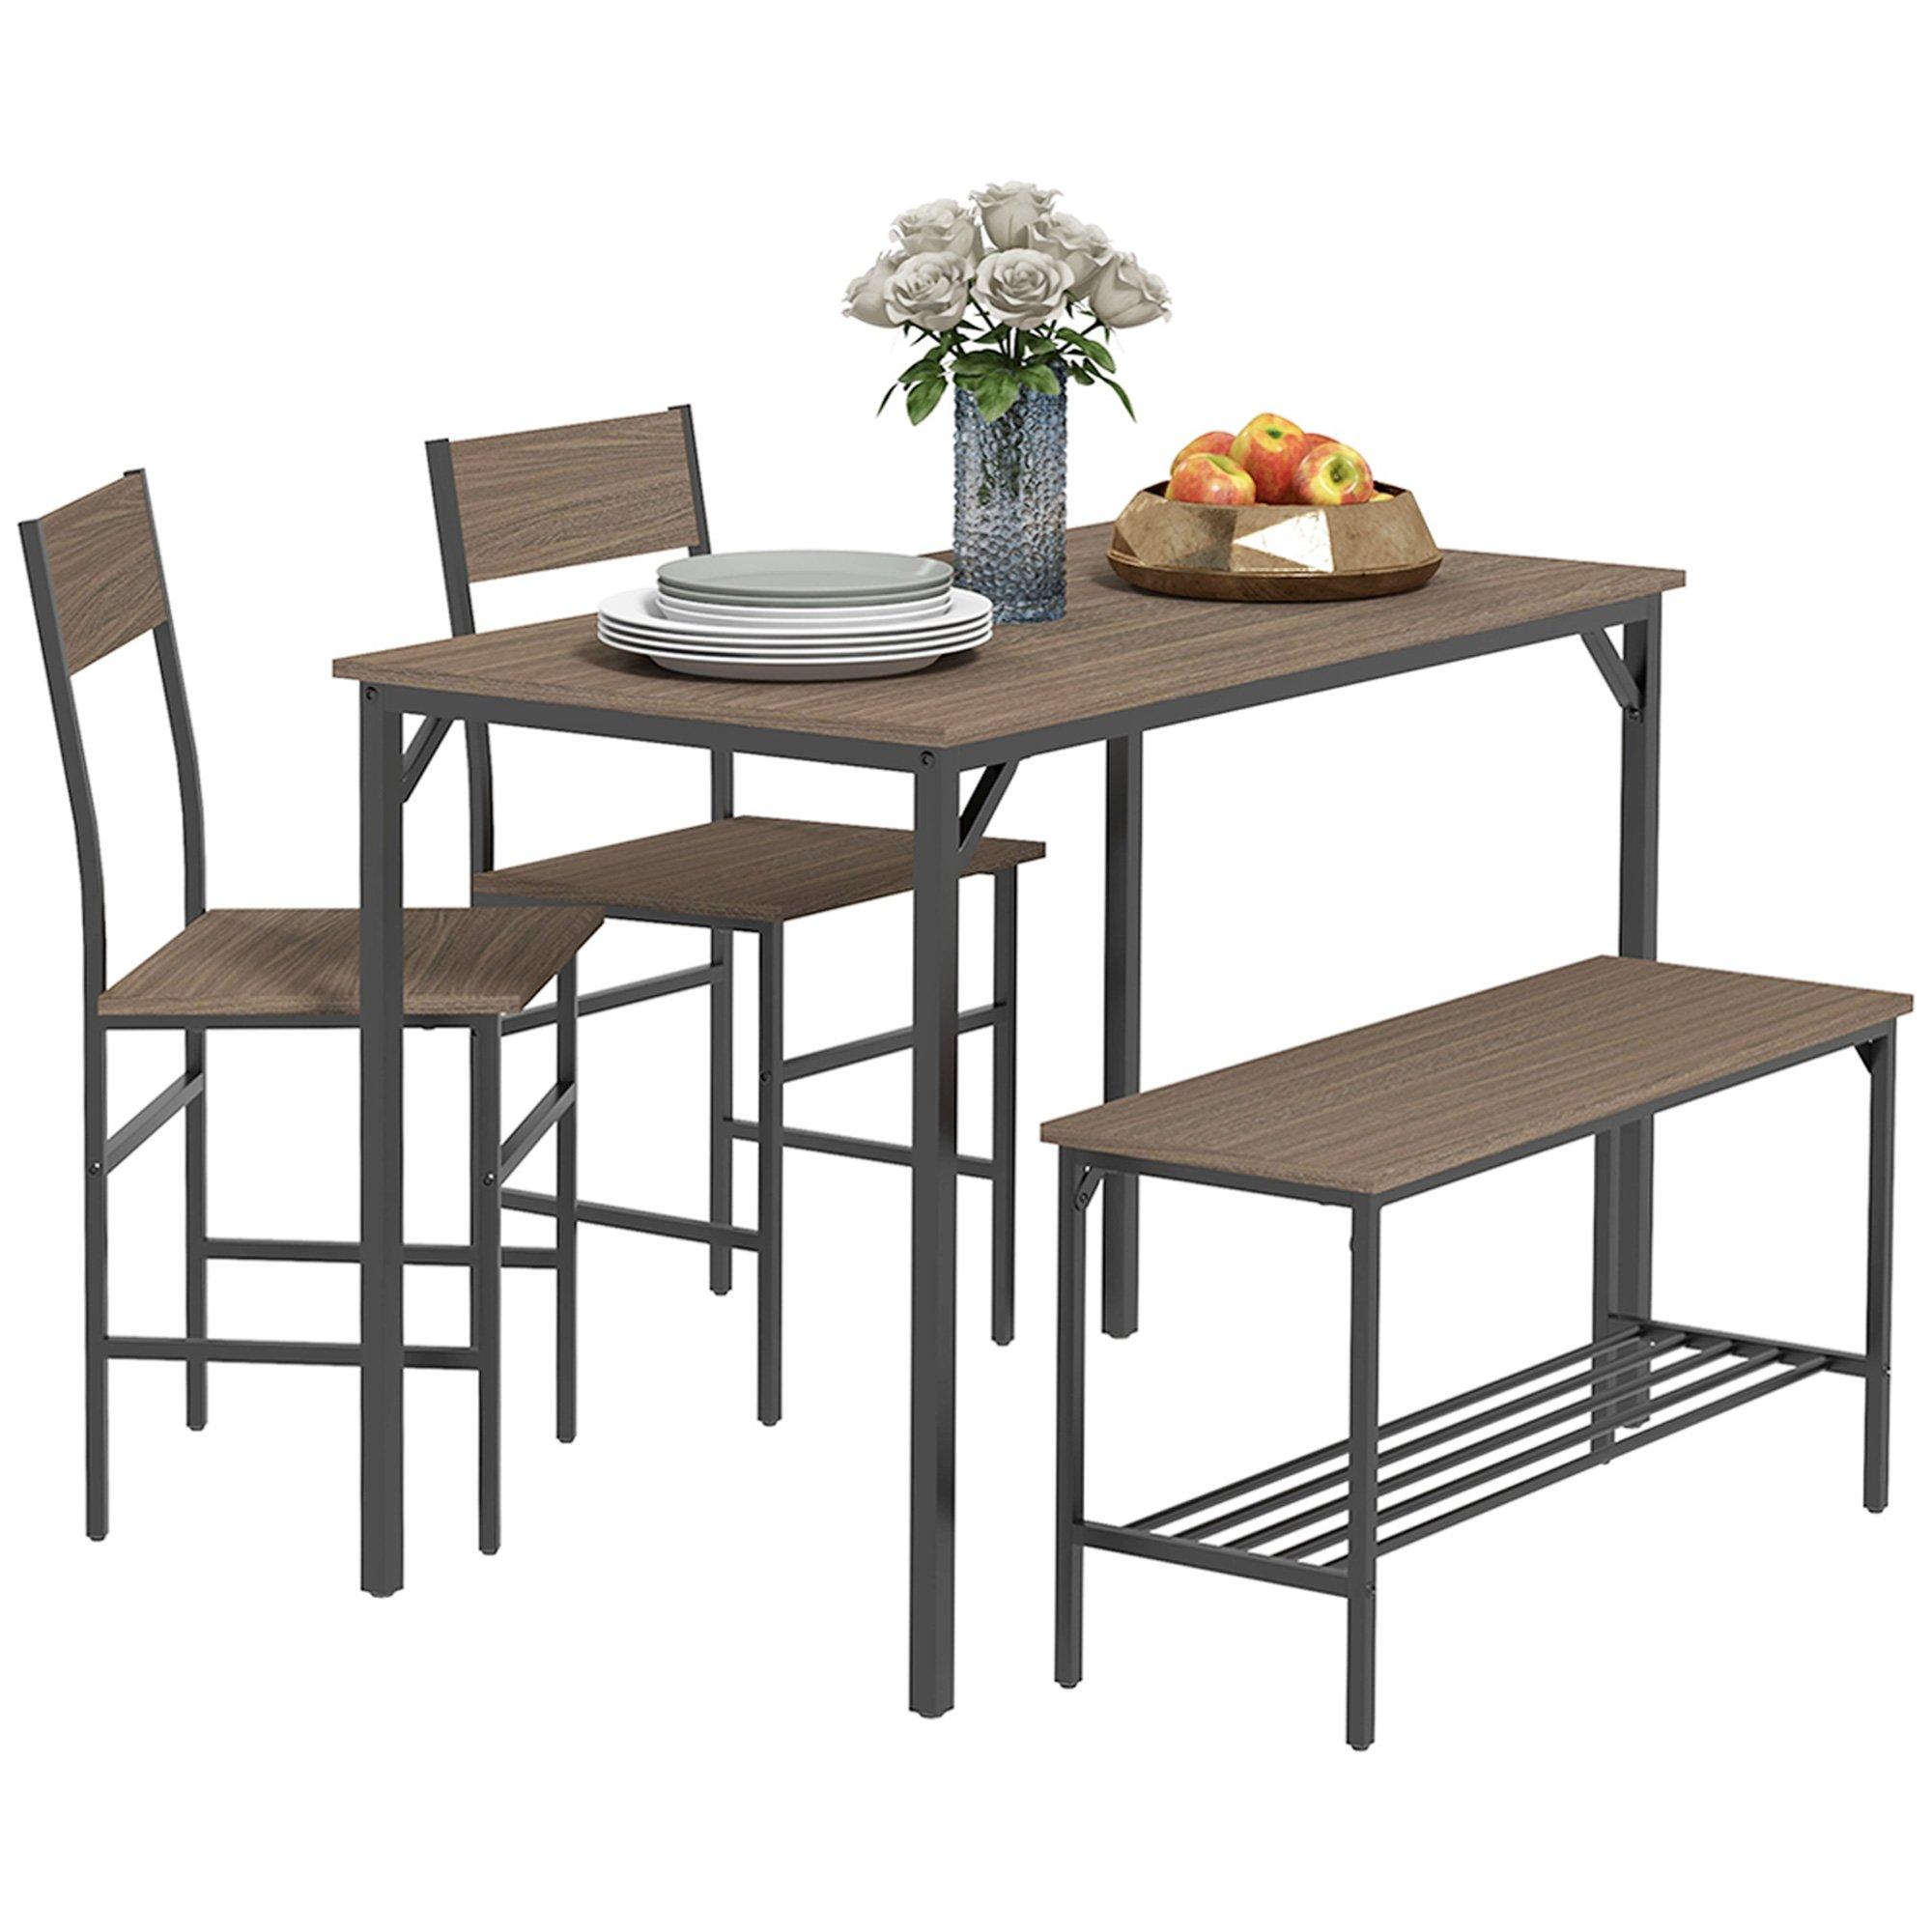 Industrial 4 Piece Dining Table and Chairs Set Kitchen Table Set of 4